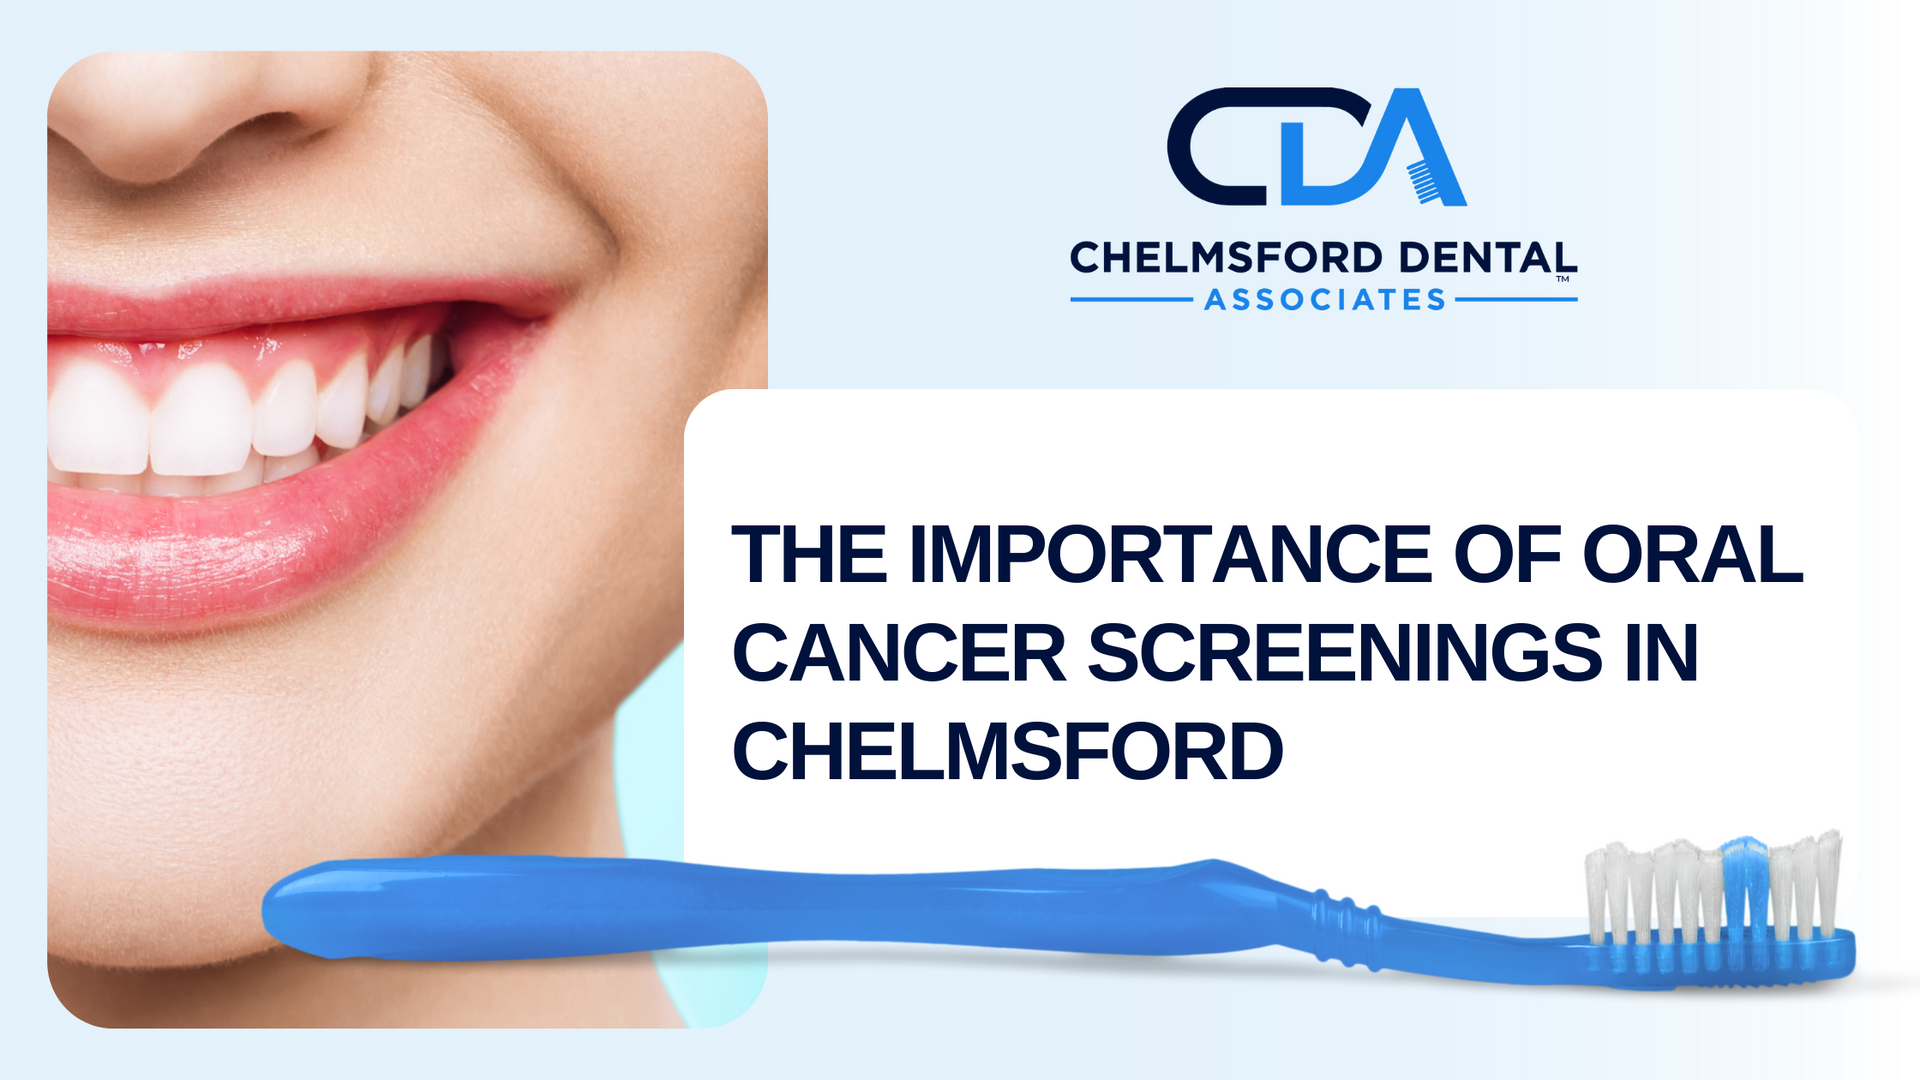 The importance of oral cancer screenings in chelmsford